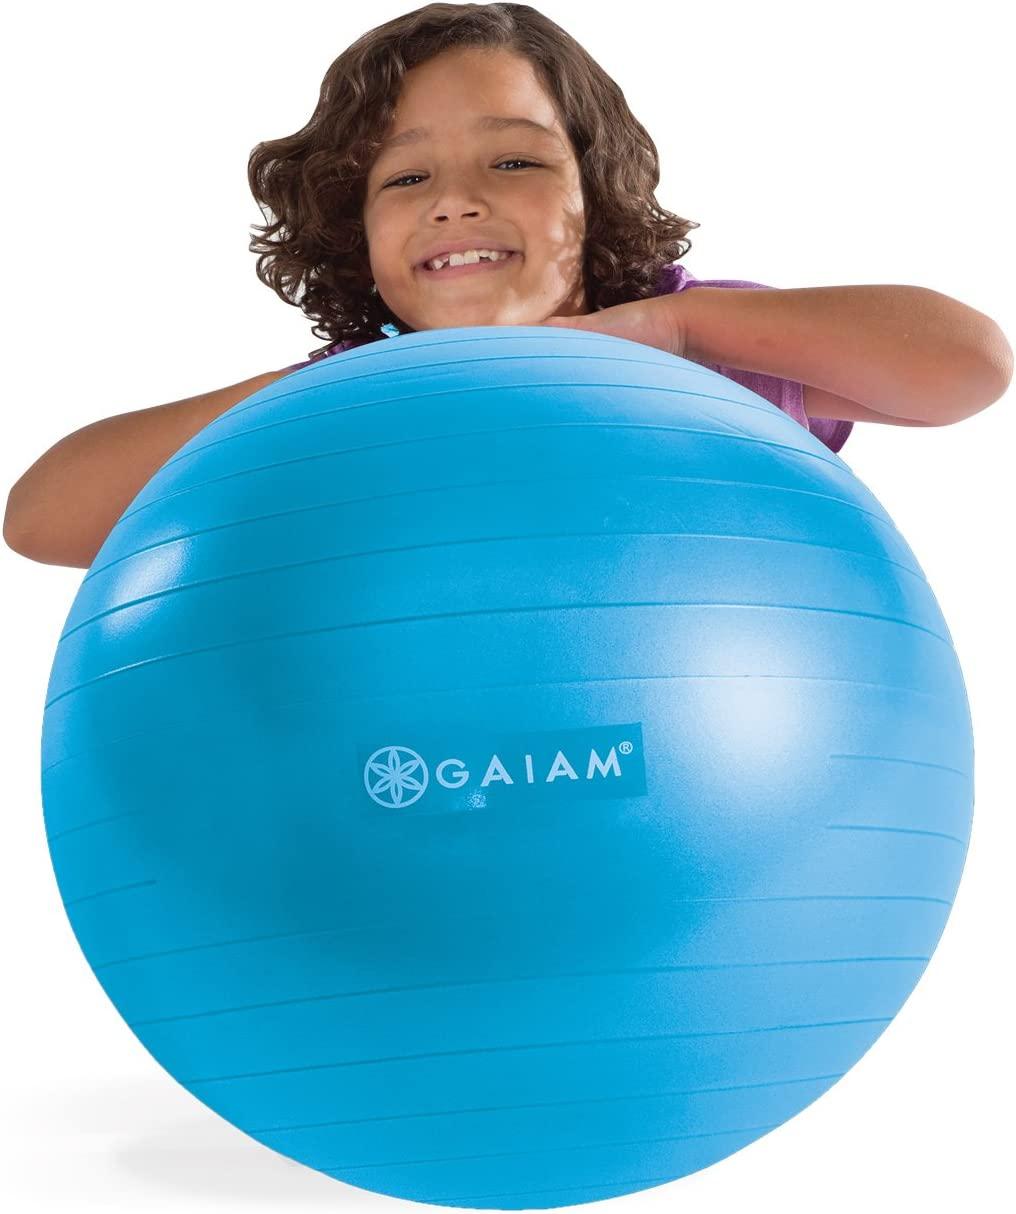 Gaiam Kids Balance Ball - Exercise Stability Yoga Ball, Kids Alternative  Flexible Seating for Active Children in Home or Classroom (Satisfaction  Guarantee), 45cm Blue 45cm